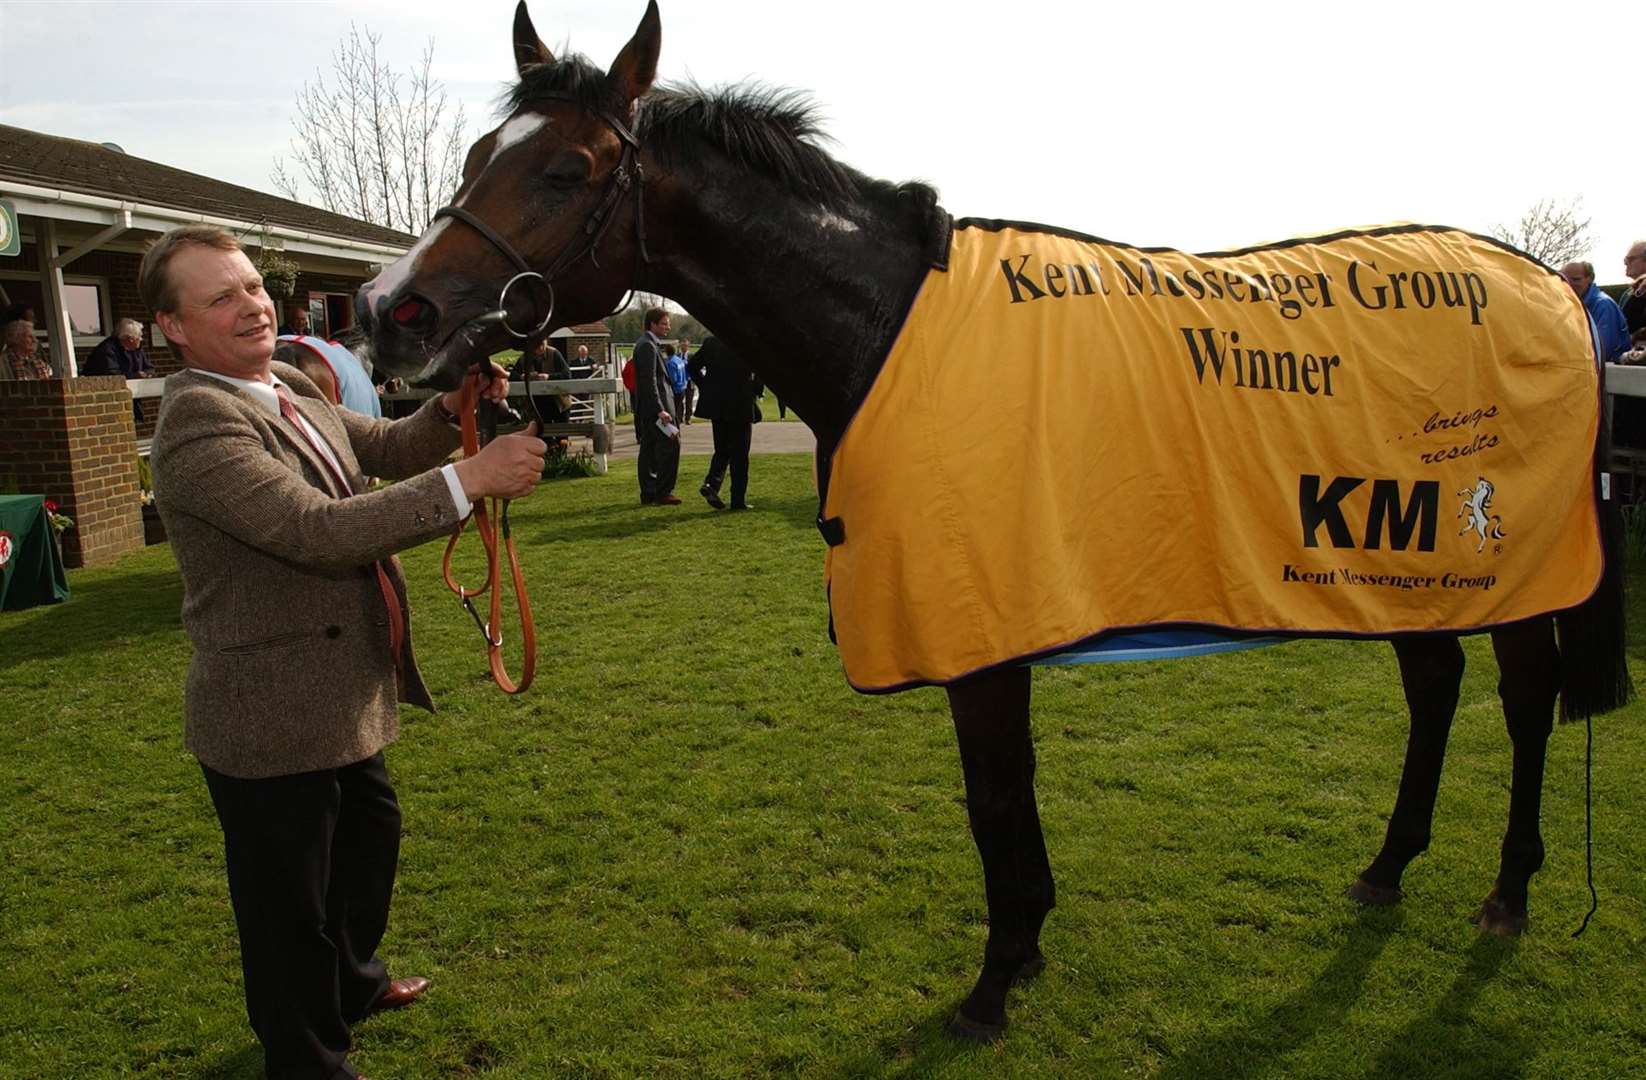 The Kentish Express Maiden Stakes Race in April 2004 was won by 'Doctorate', ridden by E Ahern, with trainer E Dunlop